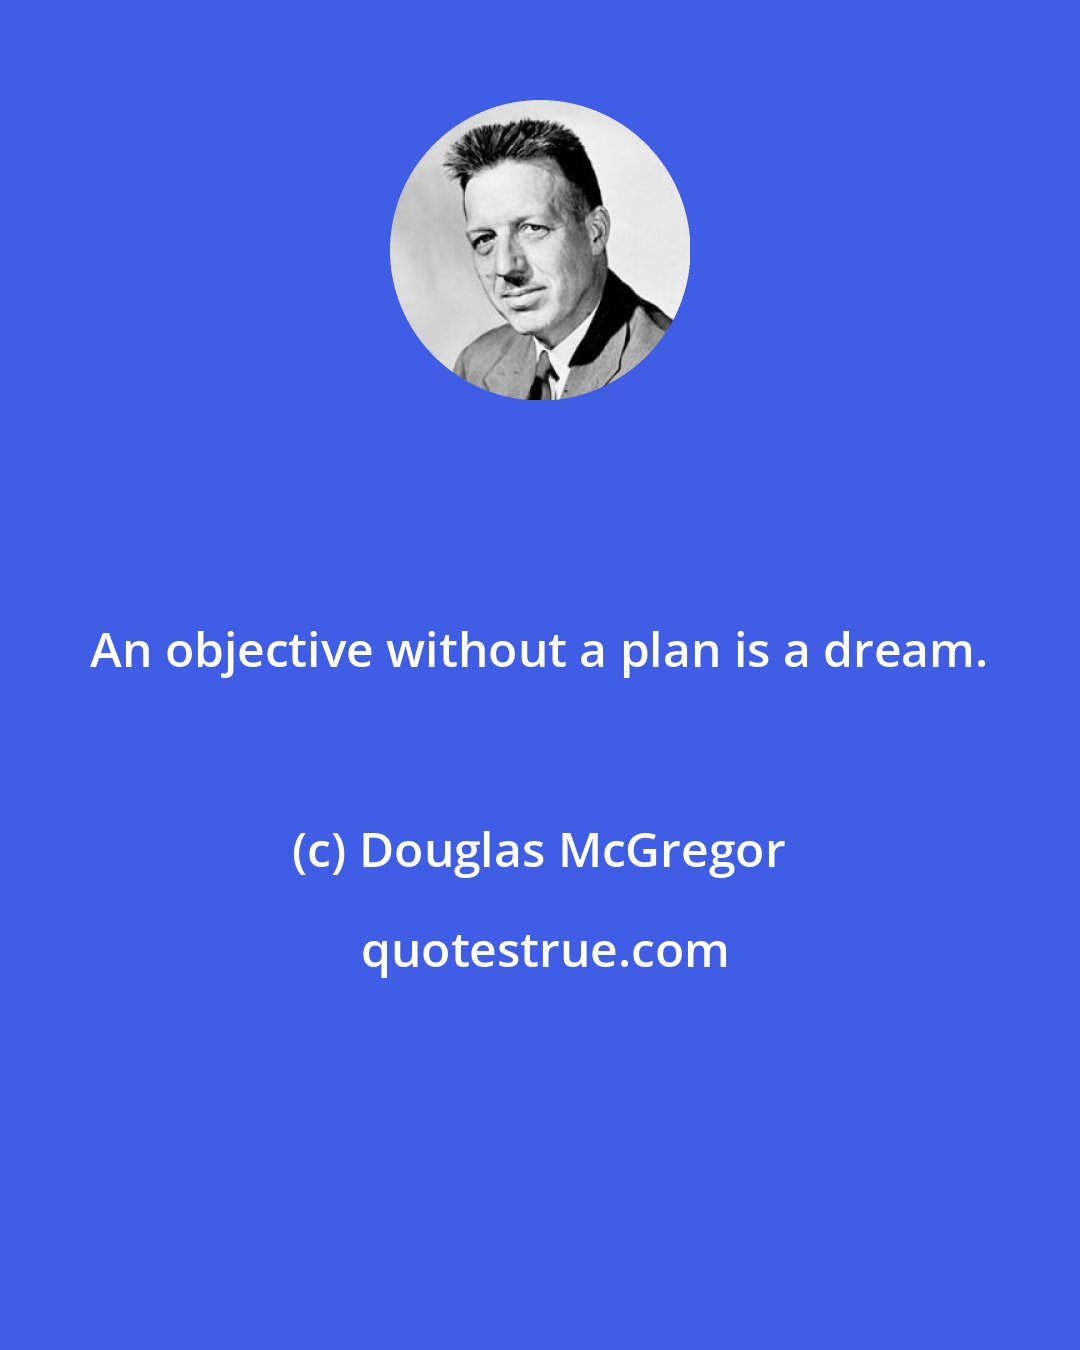 Douglas McGregor: An objective without a plan is a dream.